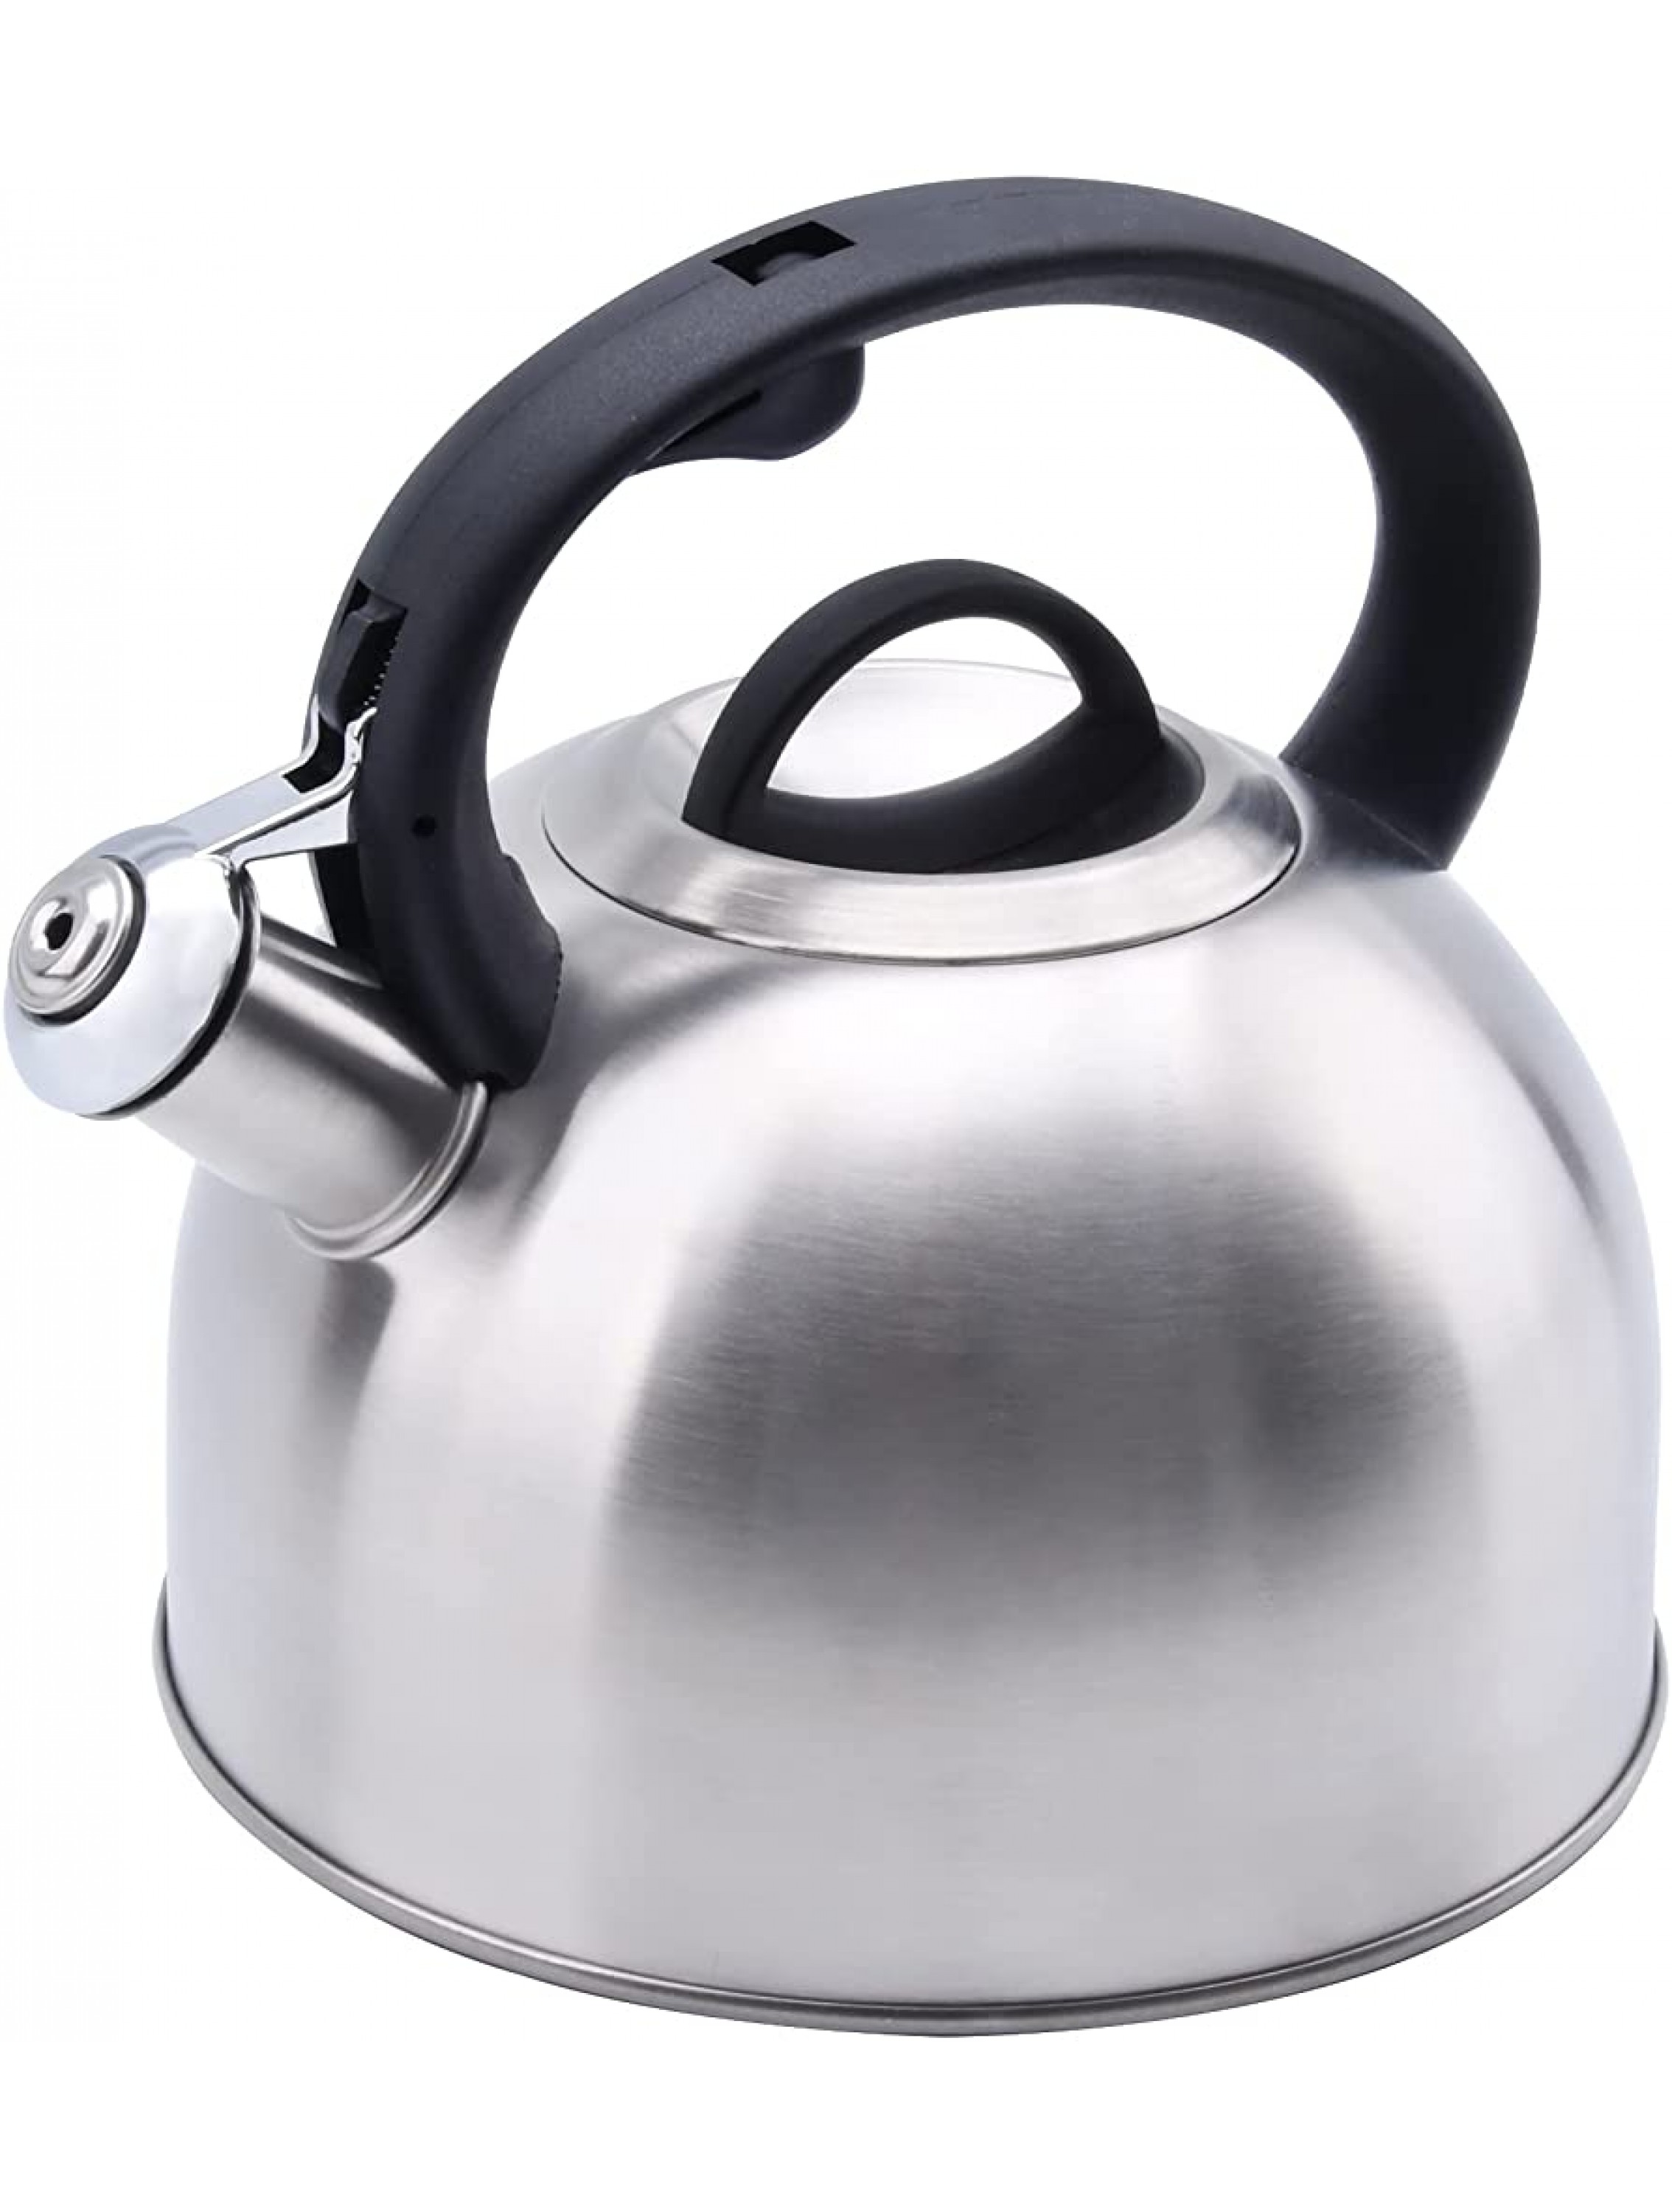 Foedo Whistling Stovetop Tea Kettle 3.2 Quart Stainless Steel Teapot Hot Water Fast to Boil Cool Touch Silicone Handle One-Touch Open and Close Button Polished Silver,3.2 Quart 3 Liter - BPN8BOMWS